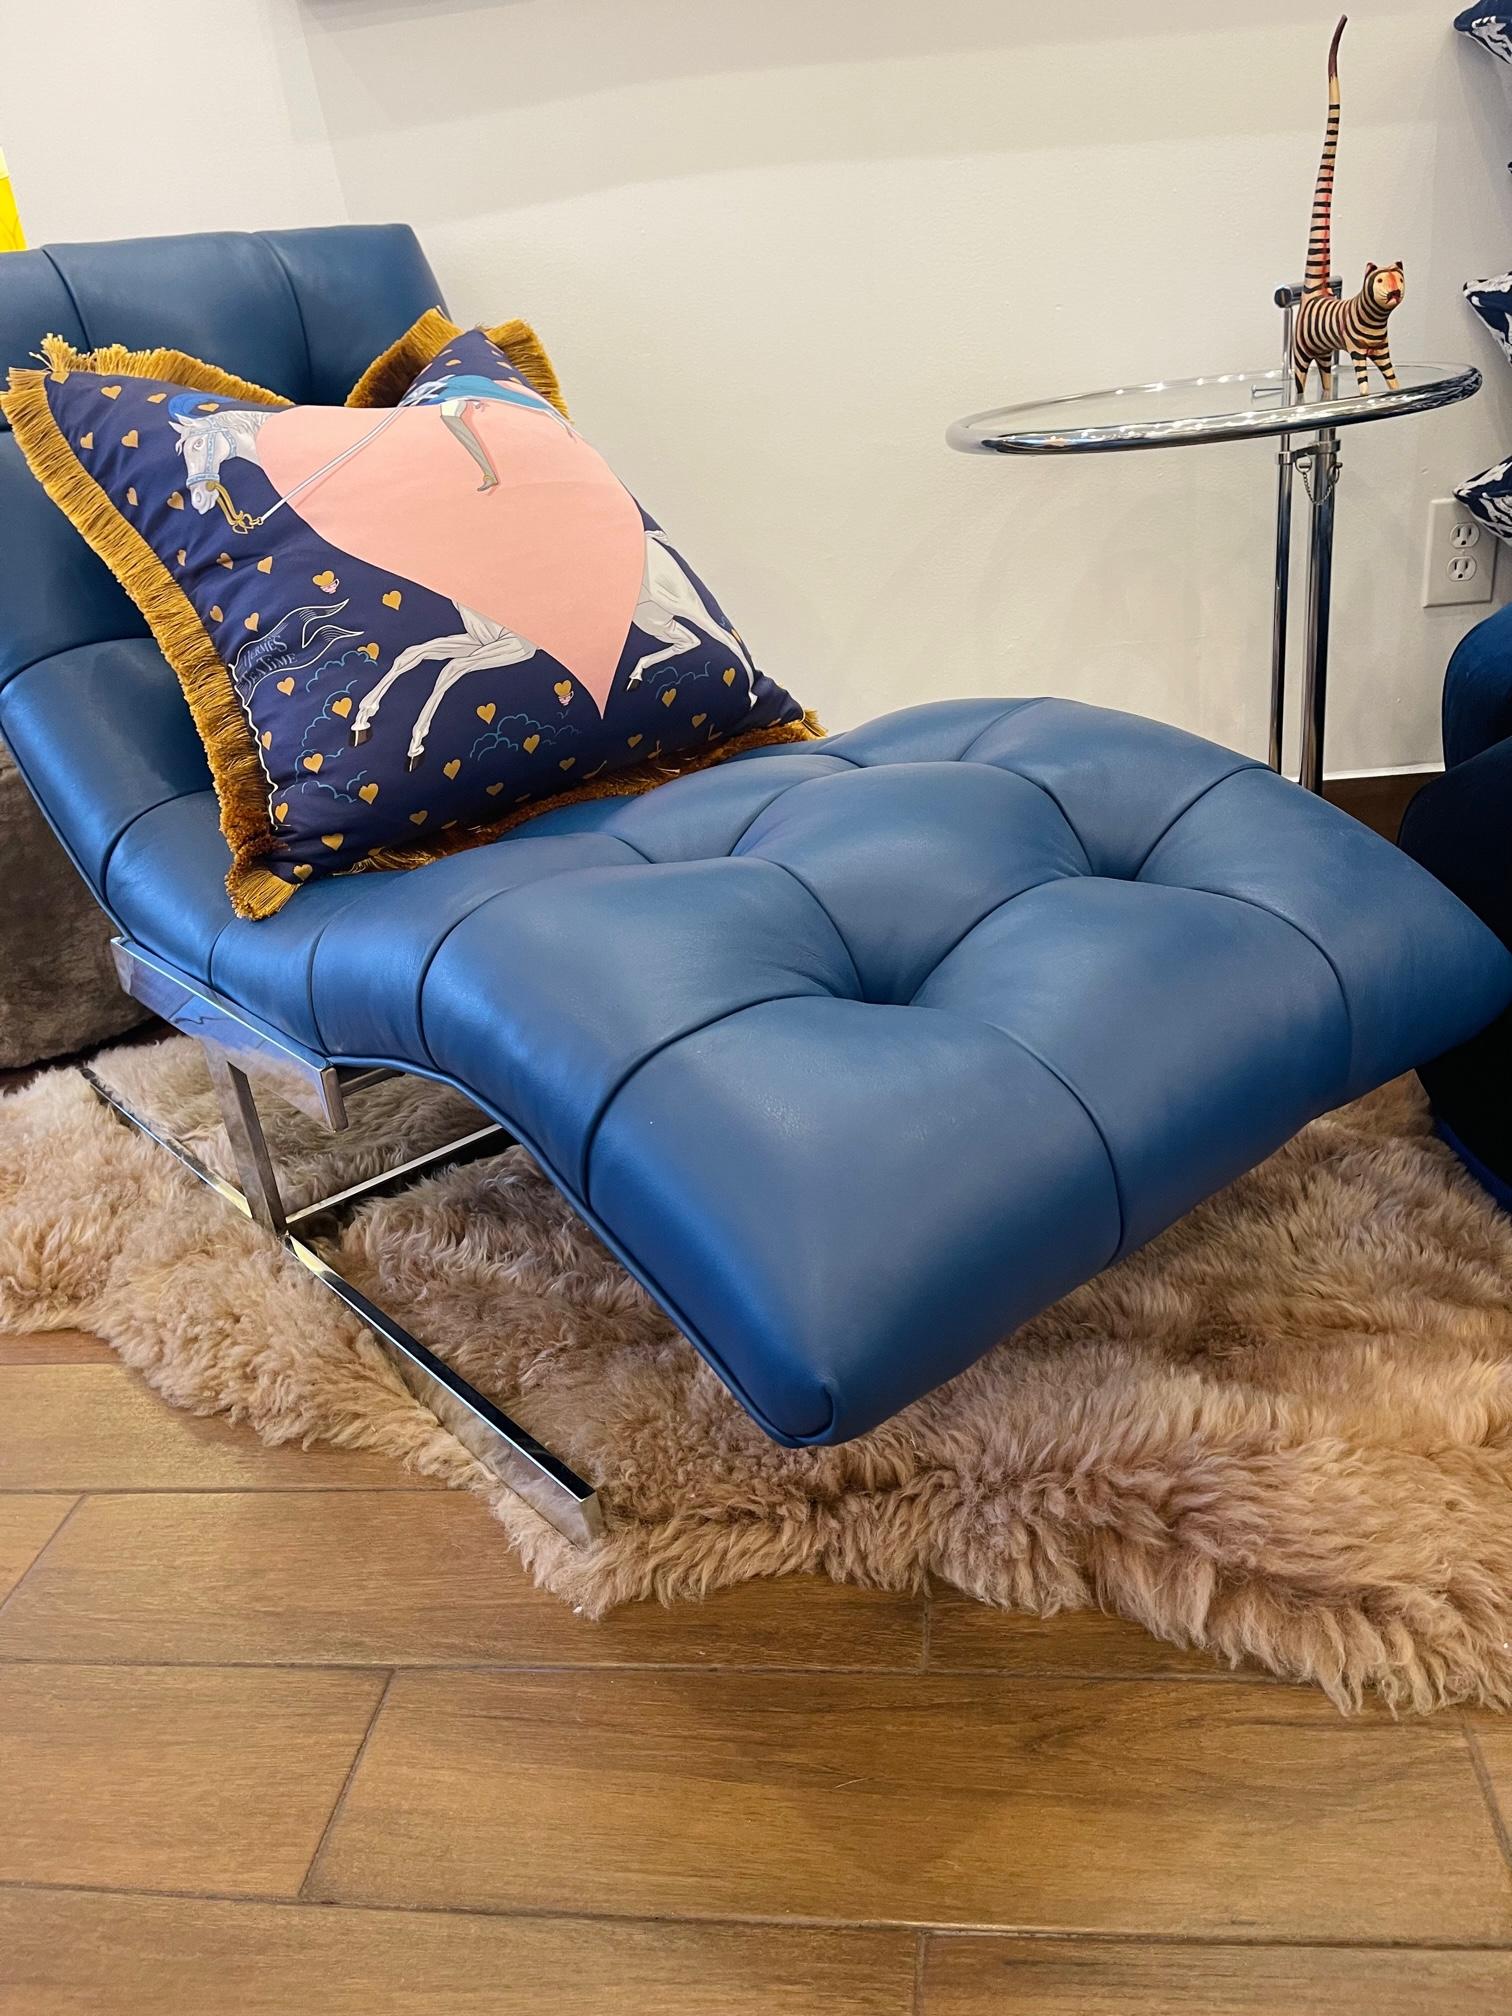 Original Milo Baughman Wave Chaise reupholstered in a rich blue Italian calfskin leather. The sleek design is perfect for daytime contemplations or night-time relaxation. The wave design and shape contours to a resting body and offers superior